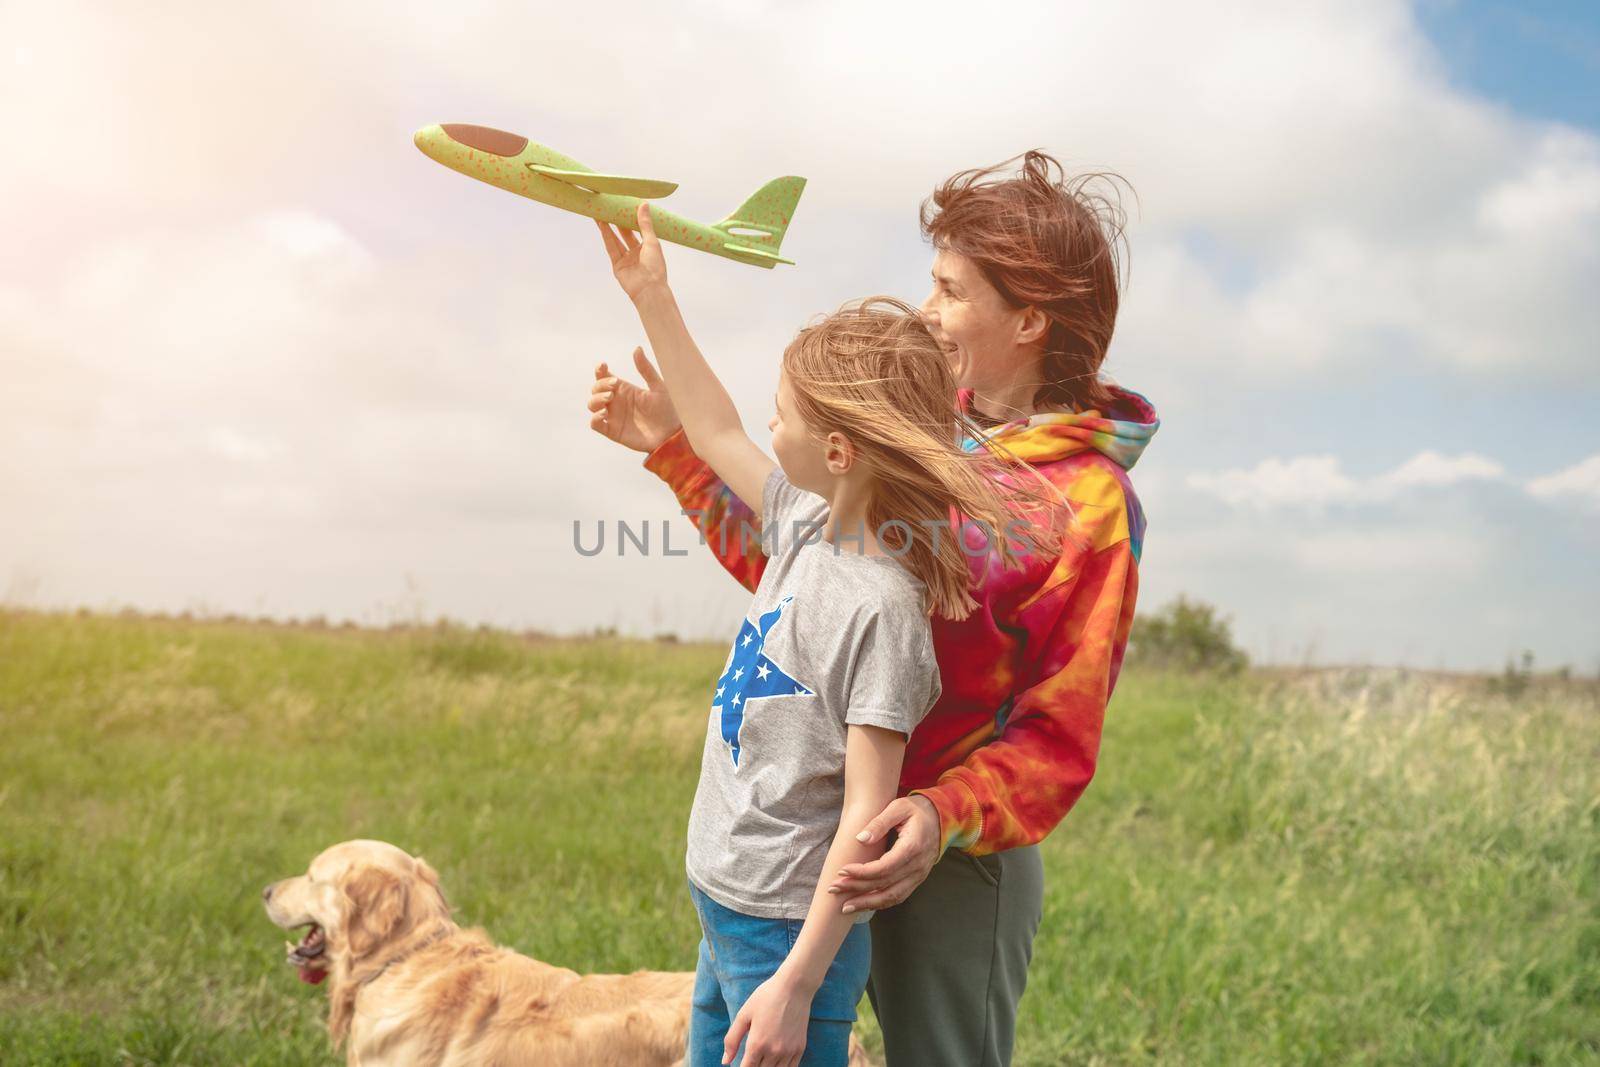 Mother and daughter playing with toy plane by GekaSkr